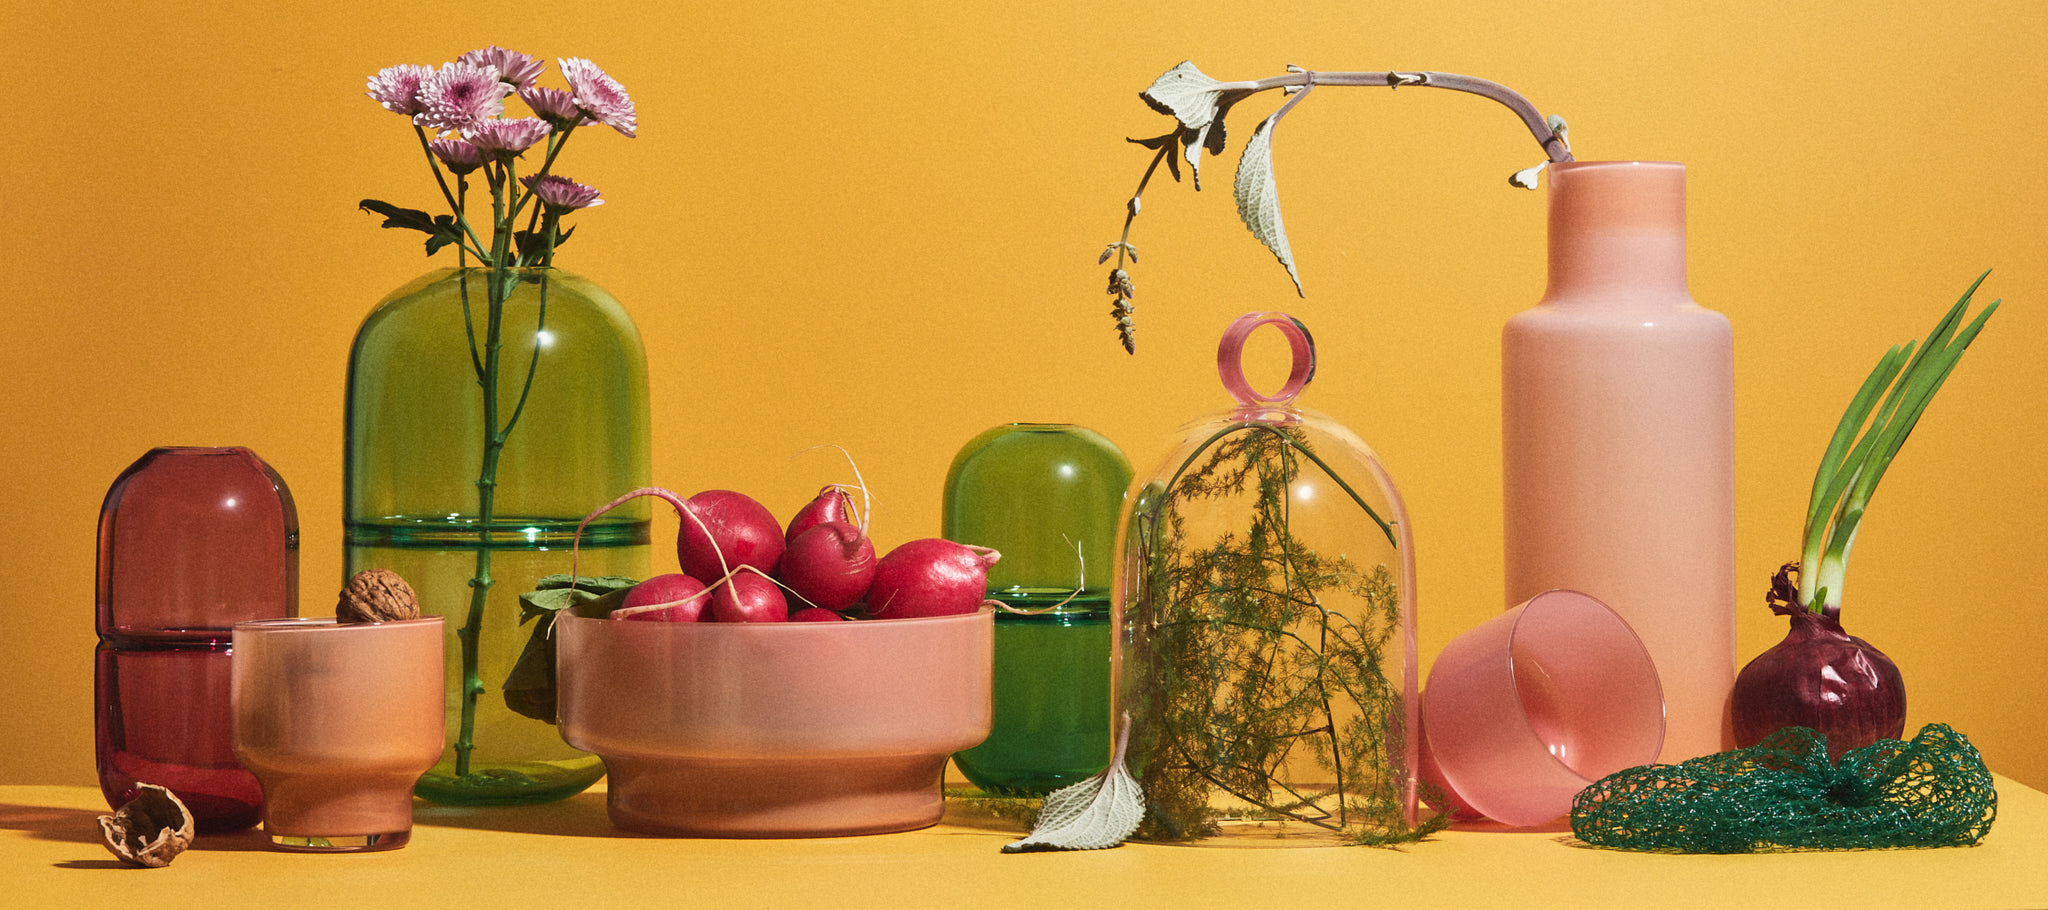 Yeend Studio Vases and Glassware are colourful and fun.